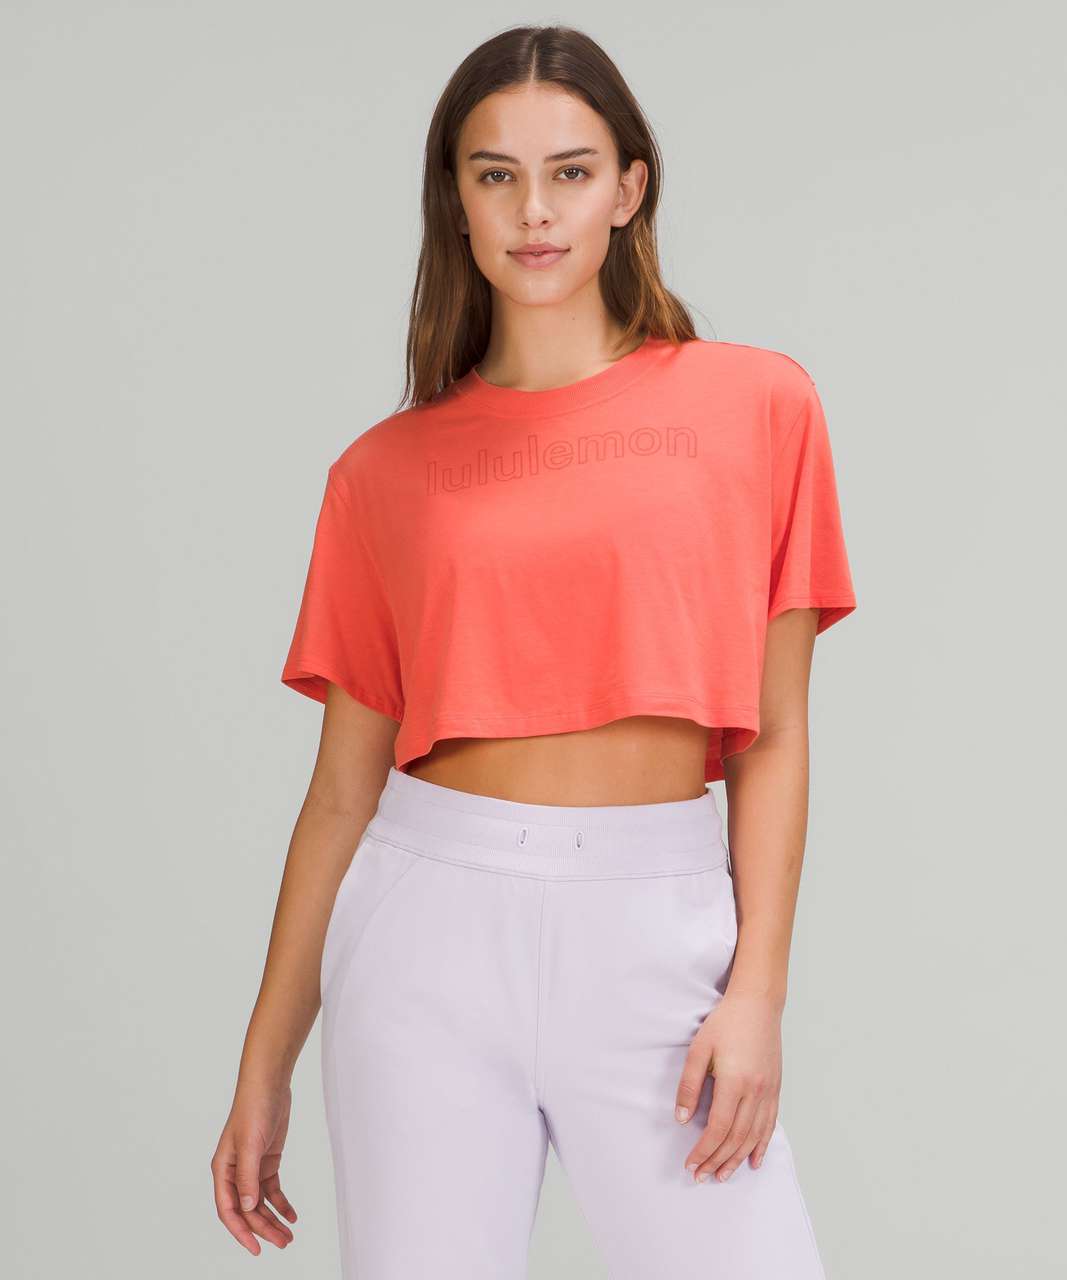 Lululemon All Yours Cropped Graphic T-Shirt - Warm Coral